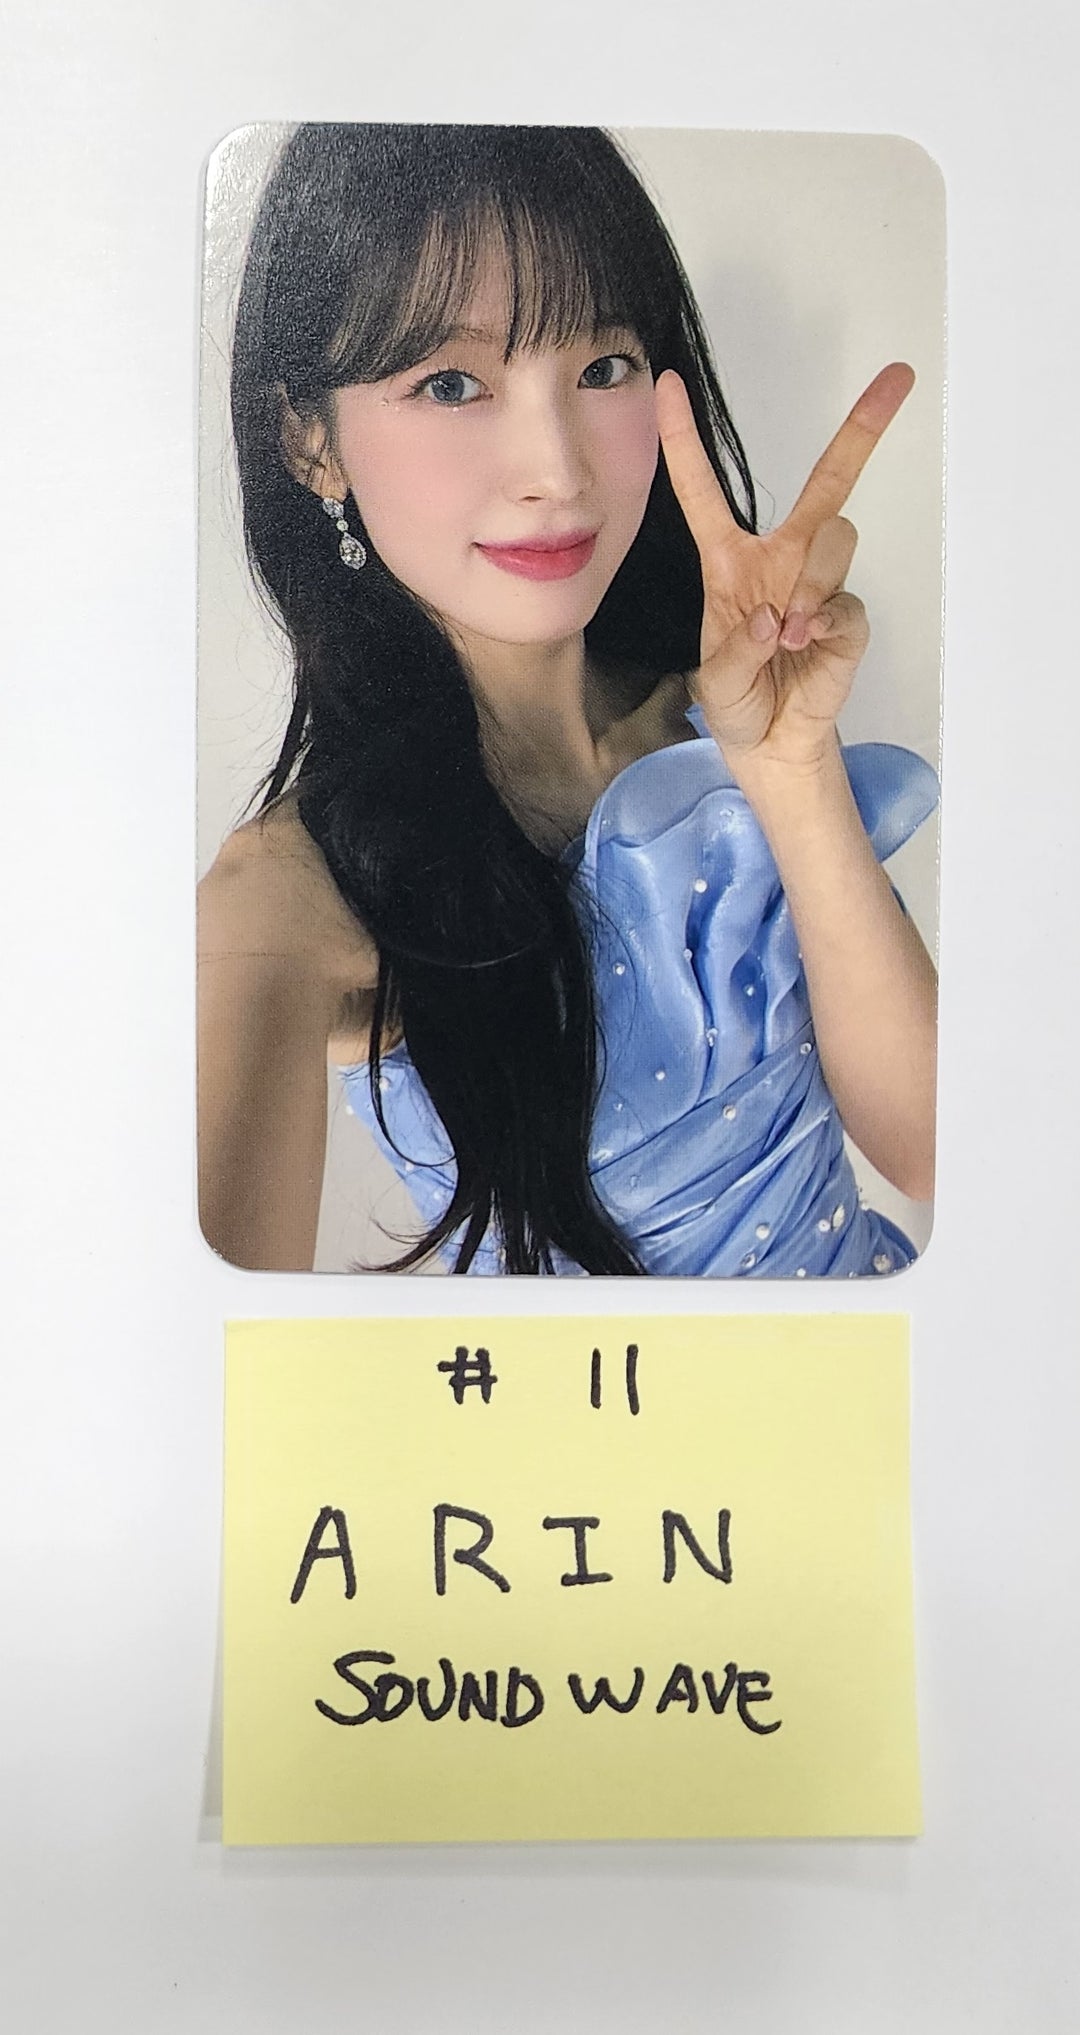 Oh My Girl "Golden Hourglass" - Soundwave Fansign Event Photocard